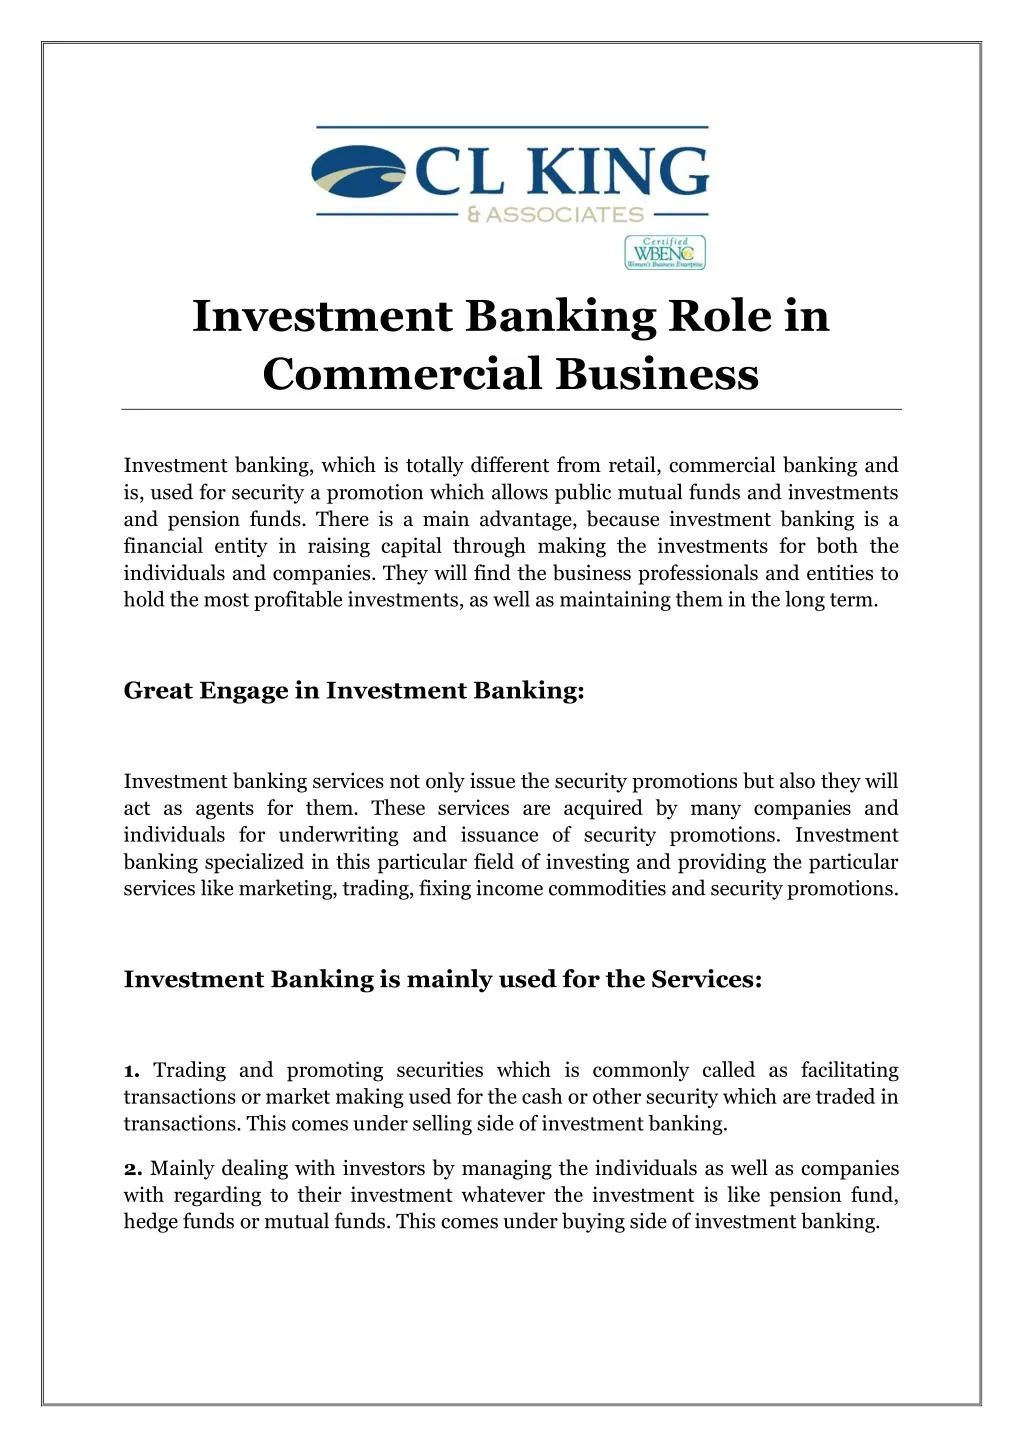 investment banking role in commercial business